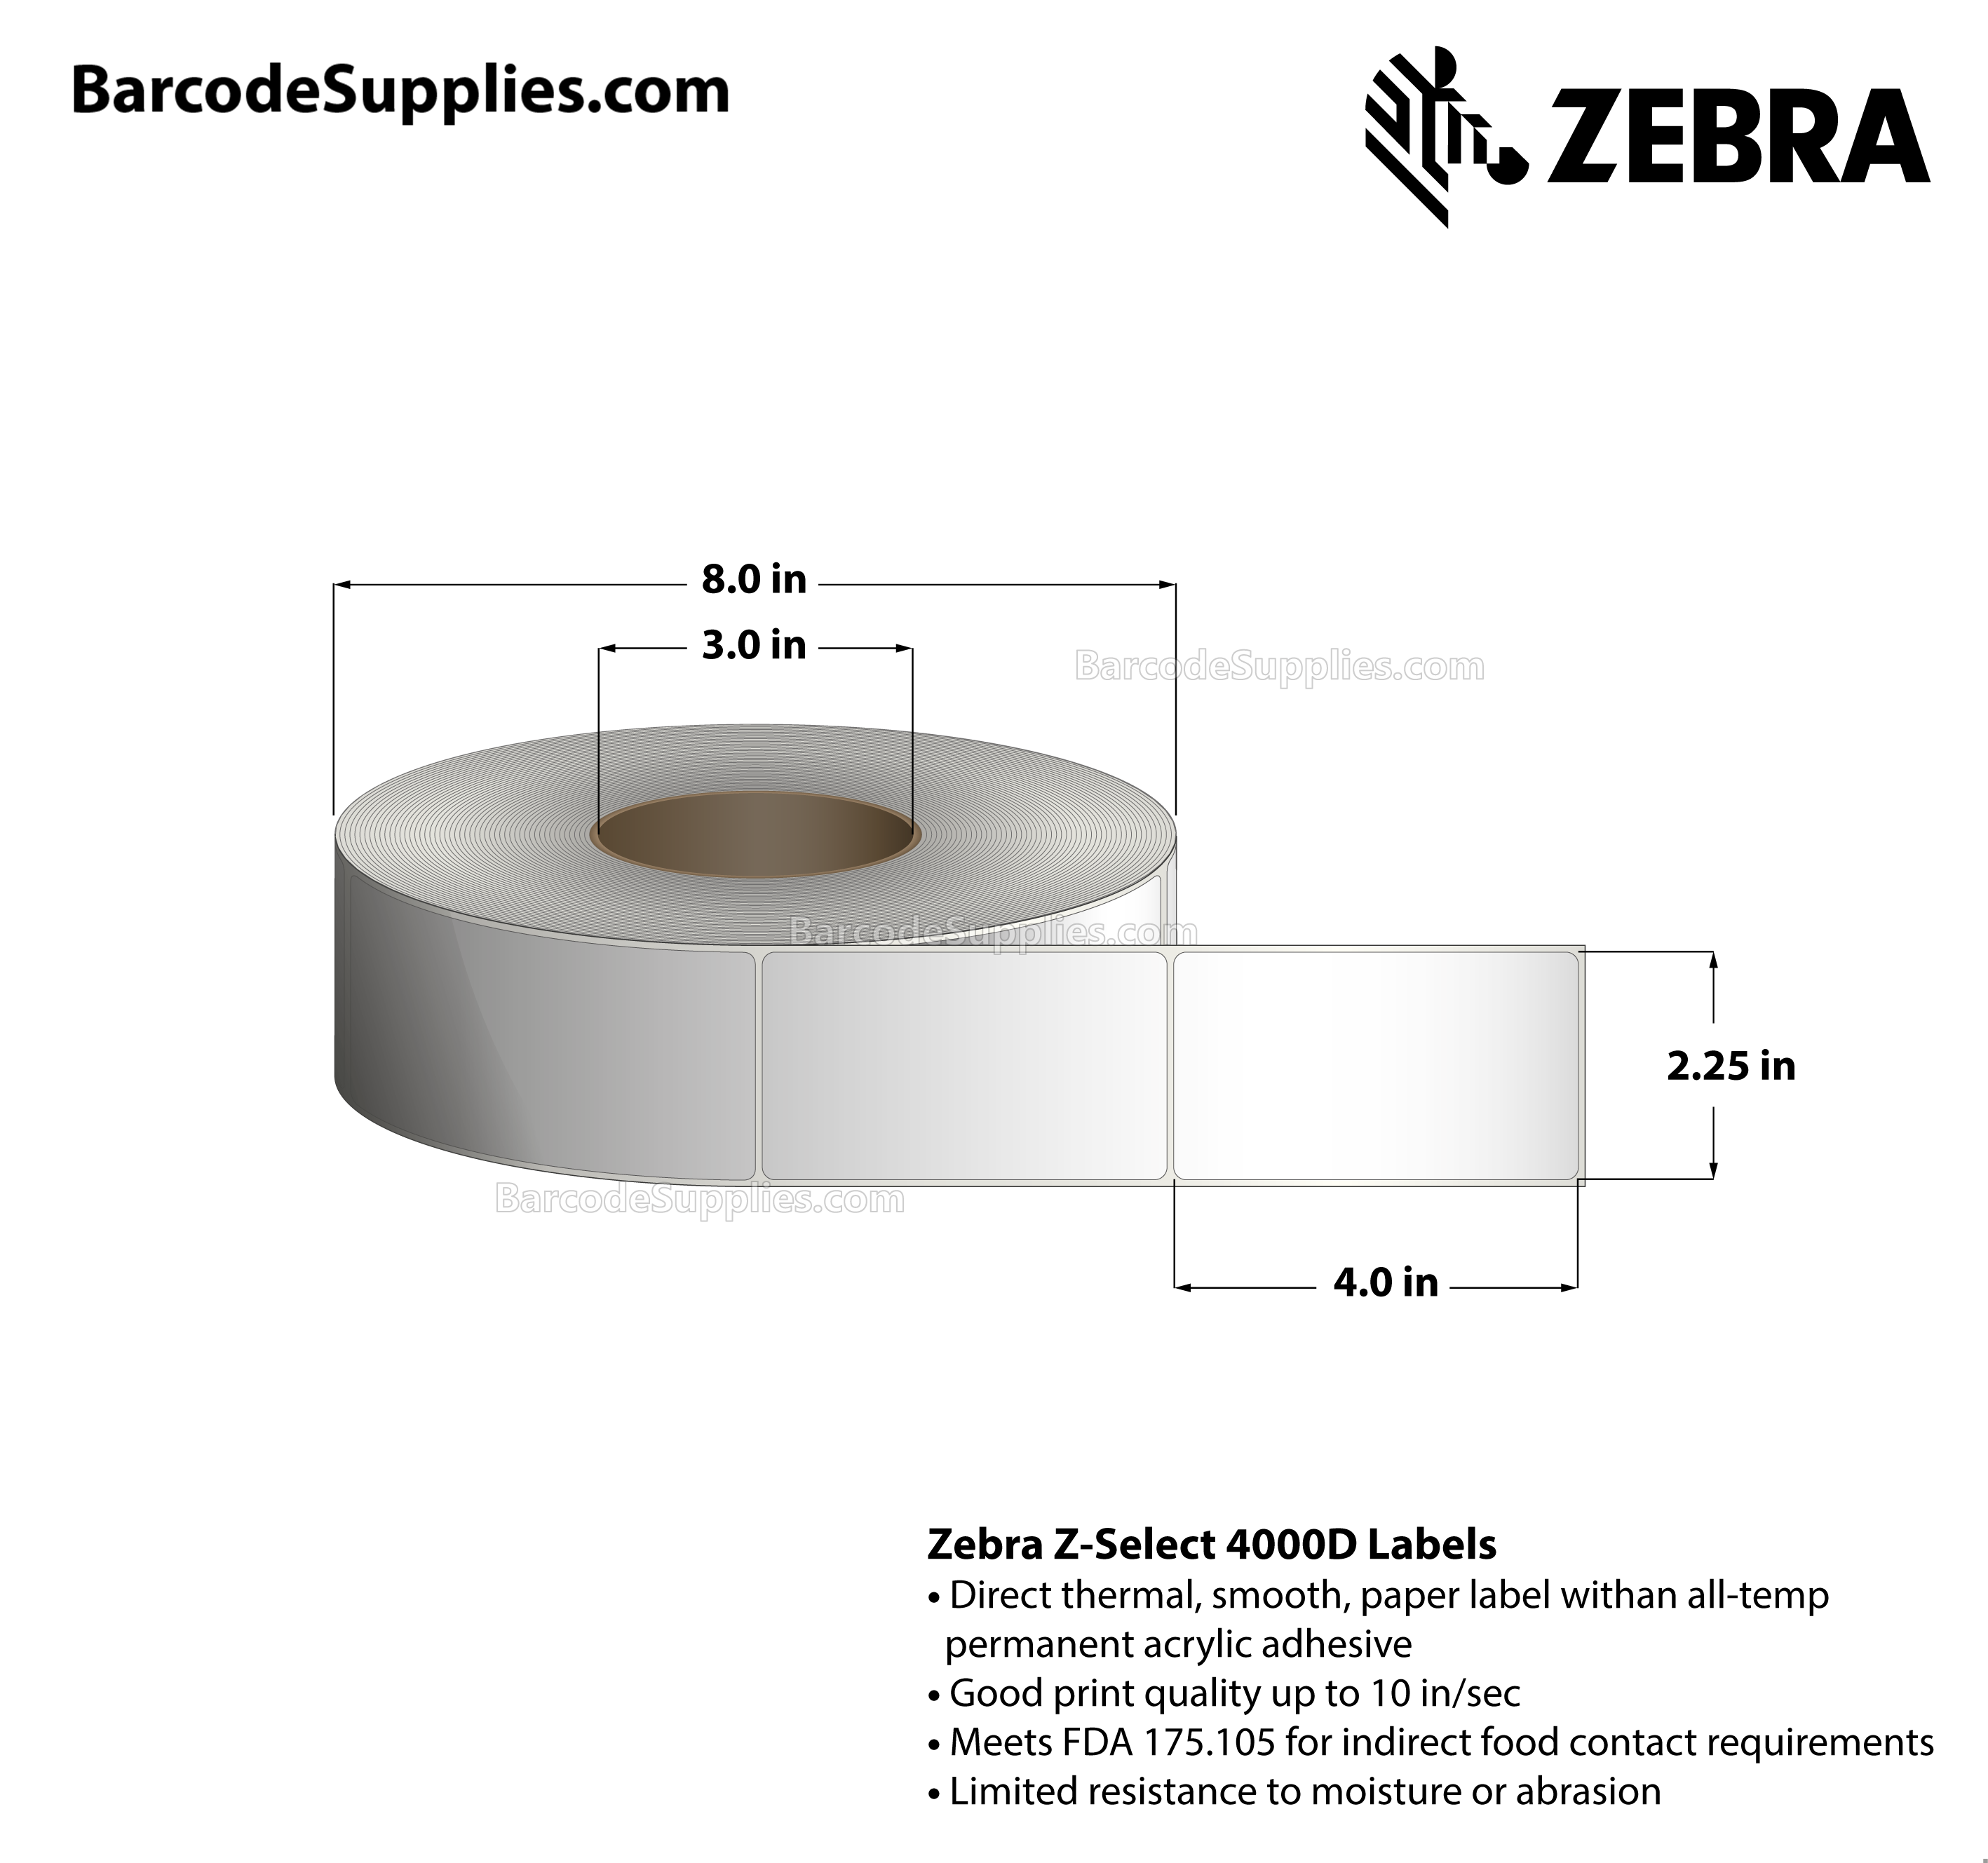 2.25 x 4 Direct Thermal White Z-Select 4000D Labels With All-Temp Adhesive - Not Perforated - 1260 Labels Per Roll - Carton Of 8 Rolls - 10080 Labels Total - MPN: 72278